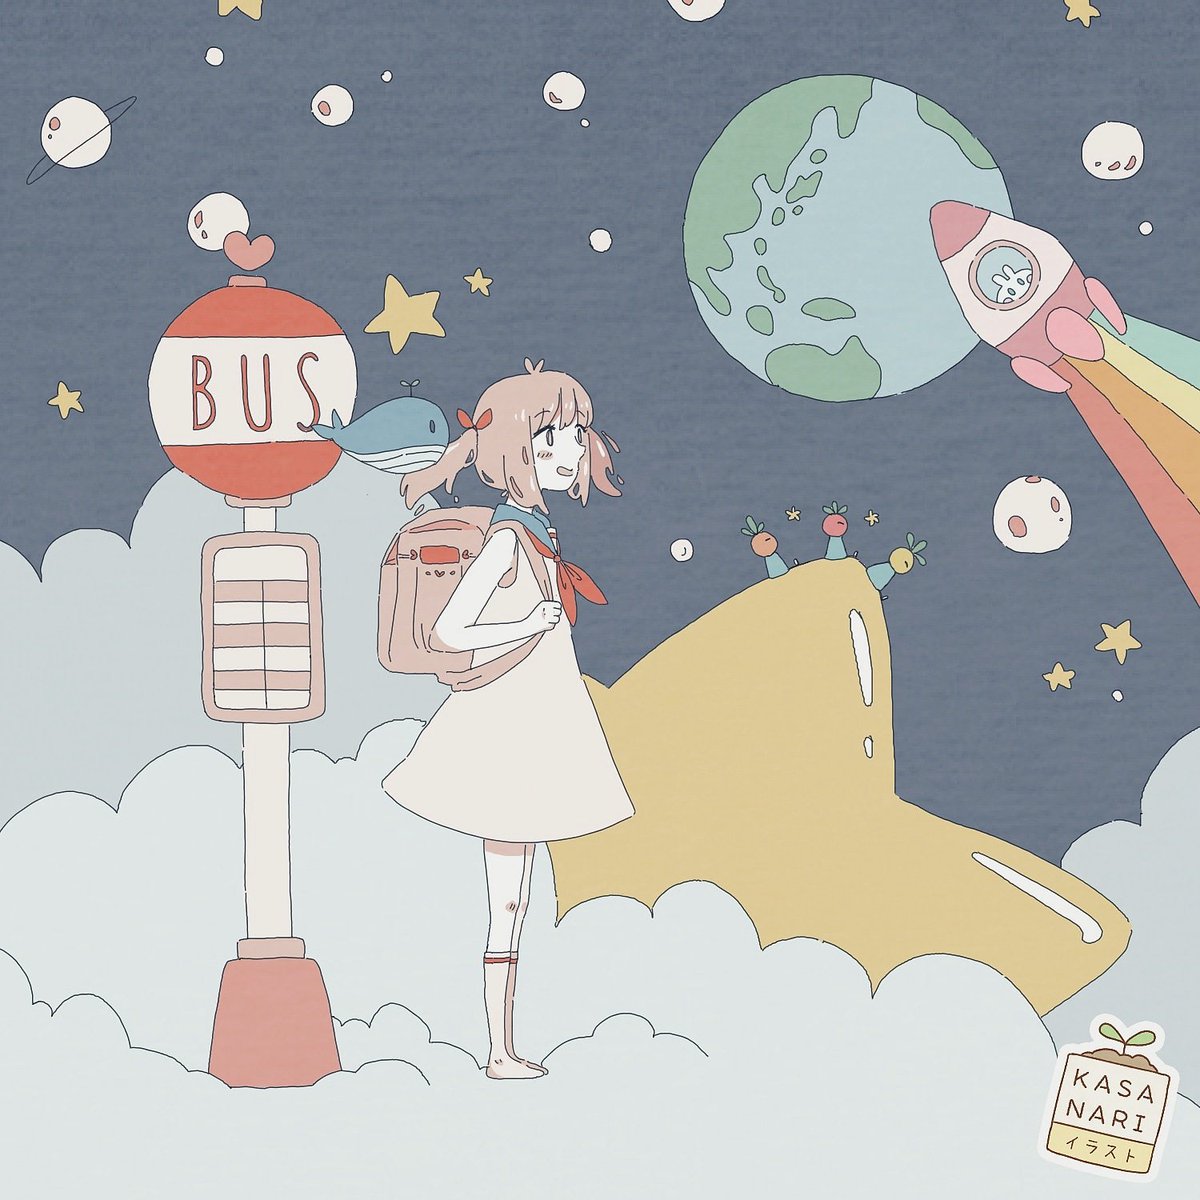 Nari 18 04 29 Waiting For The Bus To Take Her To School 学校に行くバスを待っています Space Bus Waiting School Earth Cloud Whale Rocket Star Pastel Kawaii Drawing Illustration 宇宙 バス停 待ってます 学校 地球